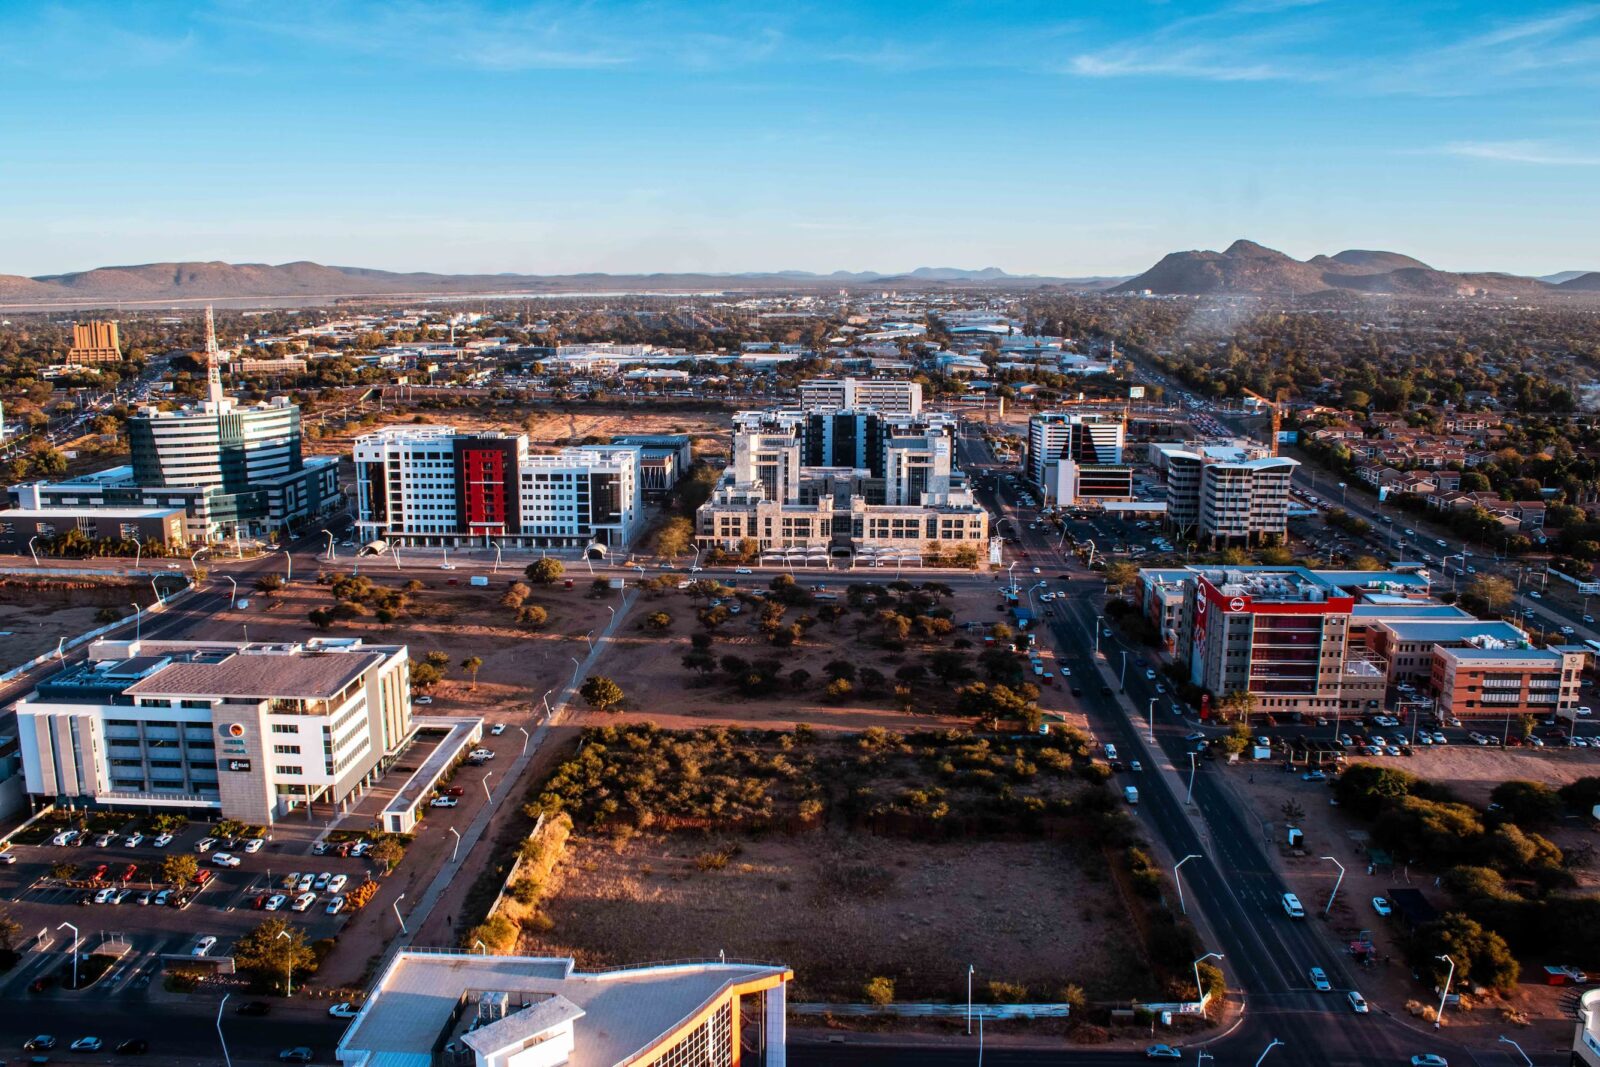 This City-Country Matching Quiz Gets Progressively Harder With Each Question – Can You Keep up With It? Gaborone, Botswana